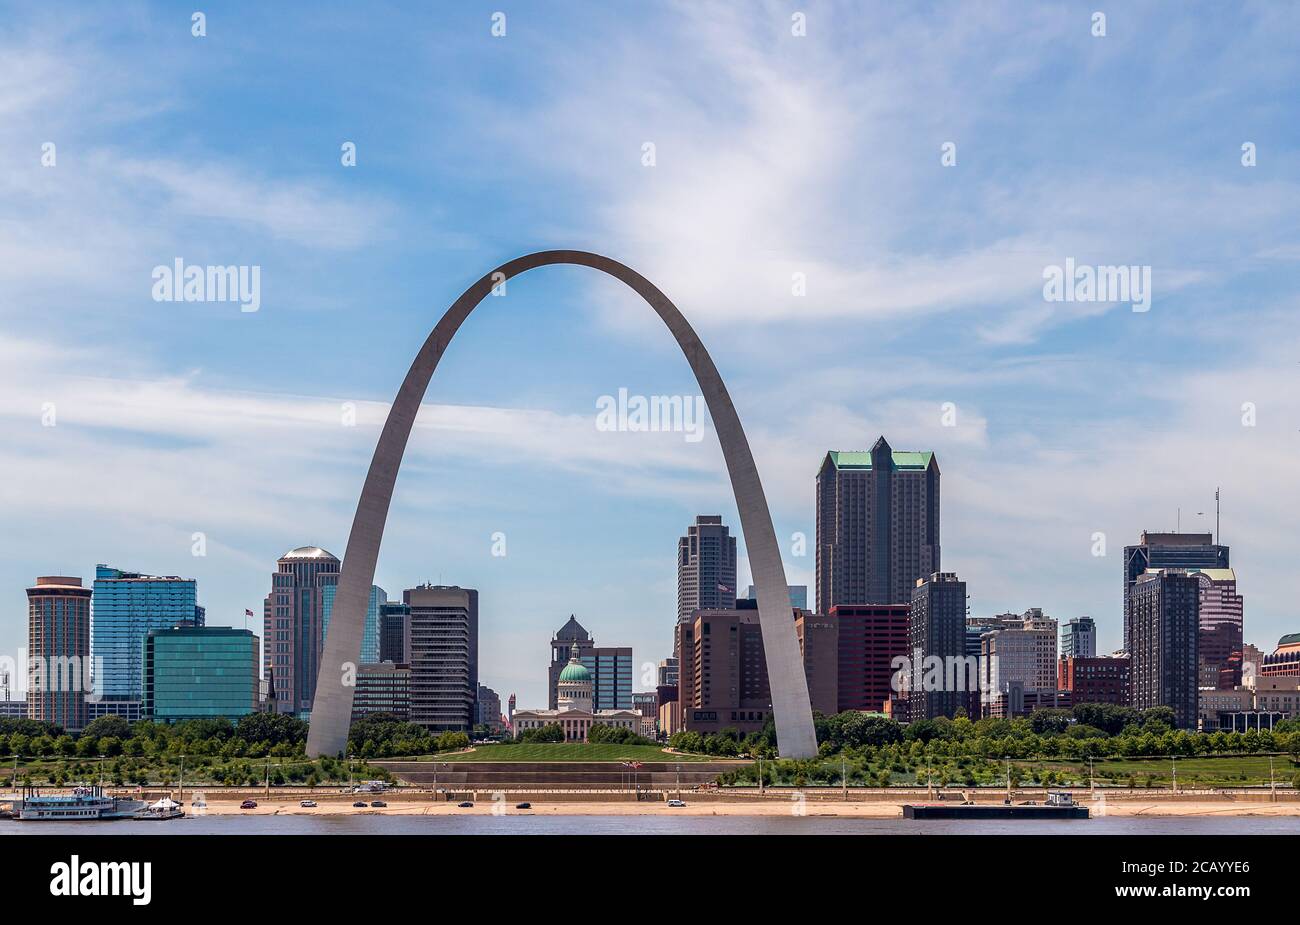 View of St. Louis and the historic Gateway Arch in Missouri, from across the Mississippi River in Malcolm W. Martin Memorial Park, Illinois Stock Photo